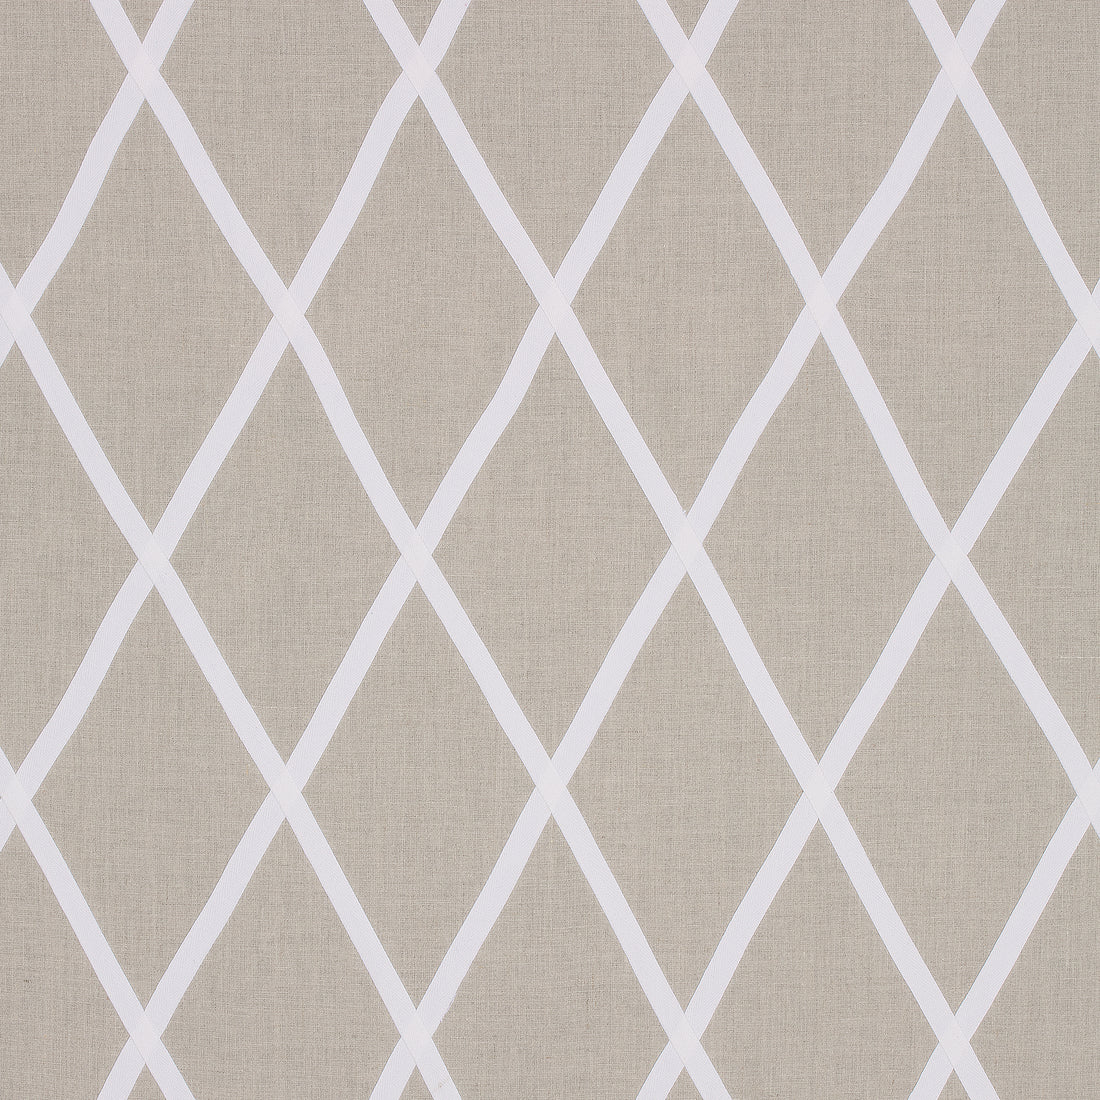 Tarascon Trellis Applique fabric in white on natural color - pattern number AW78709 - by Anna French in the Palampore collection